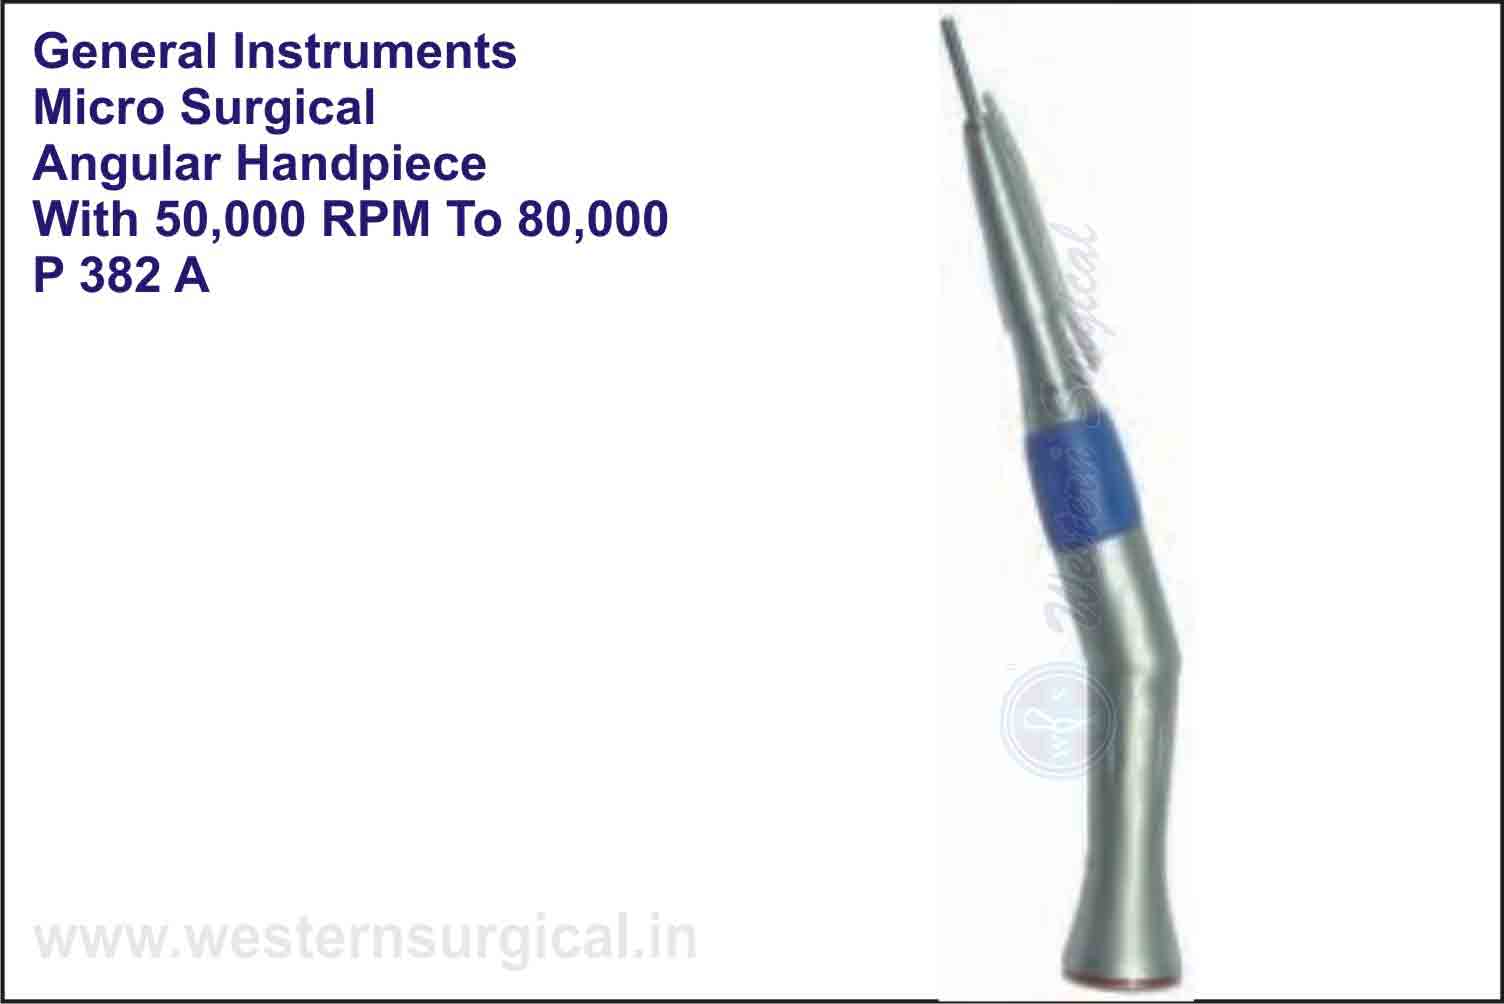 MICRO SURGICAL ANGULAR HANDPIECE WITH 50000 RPM TO 80000 RPM